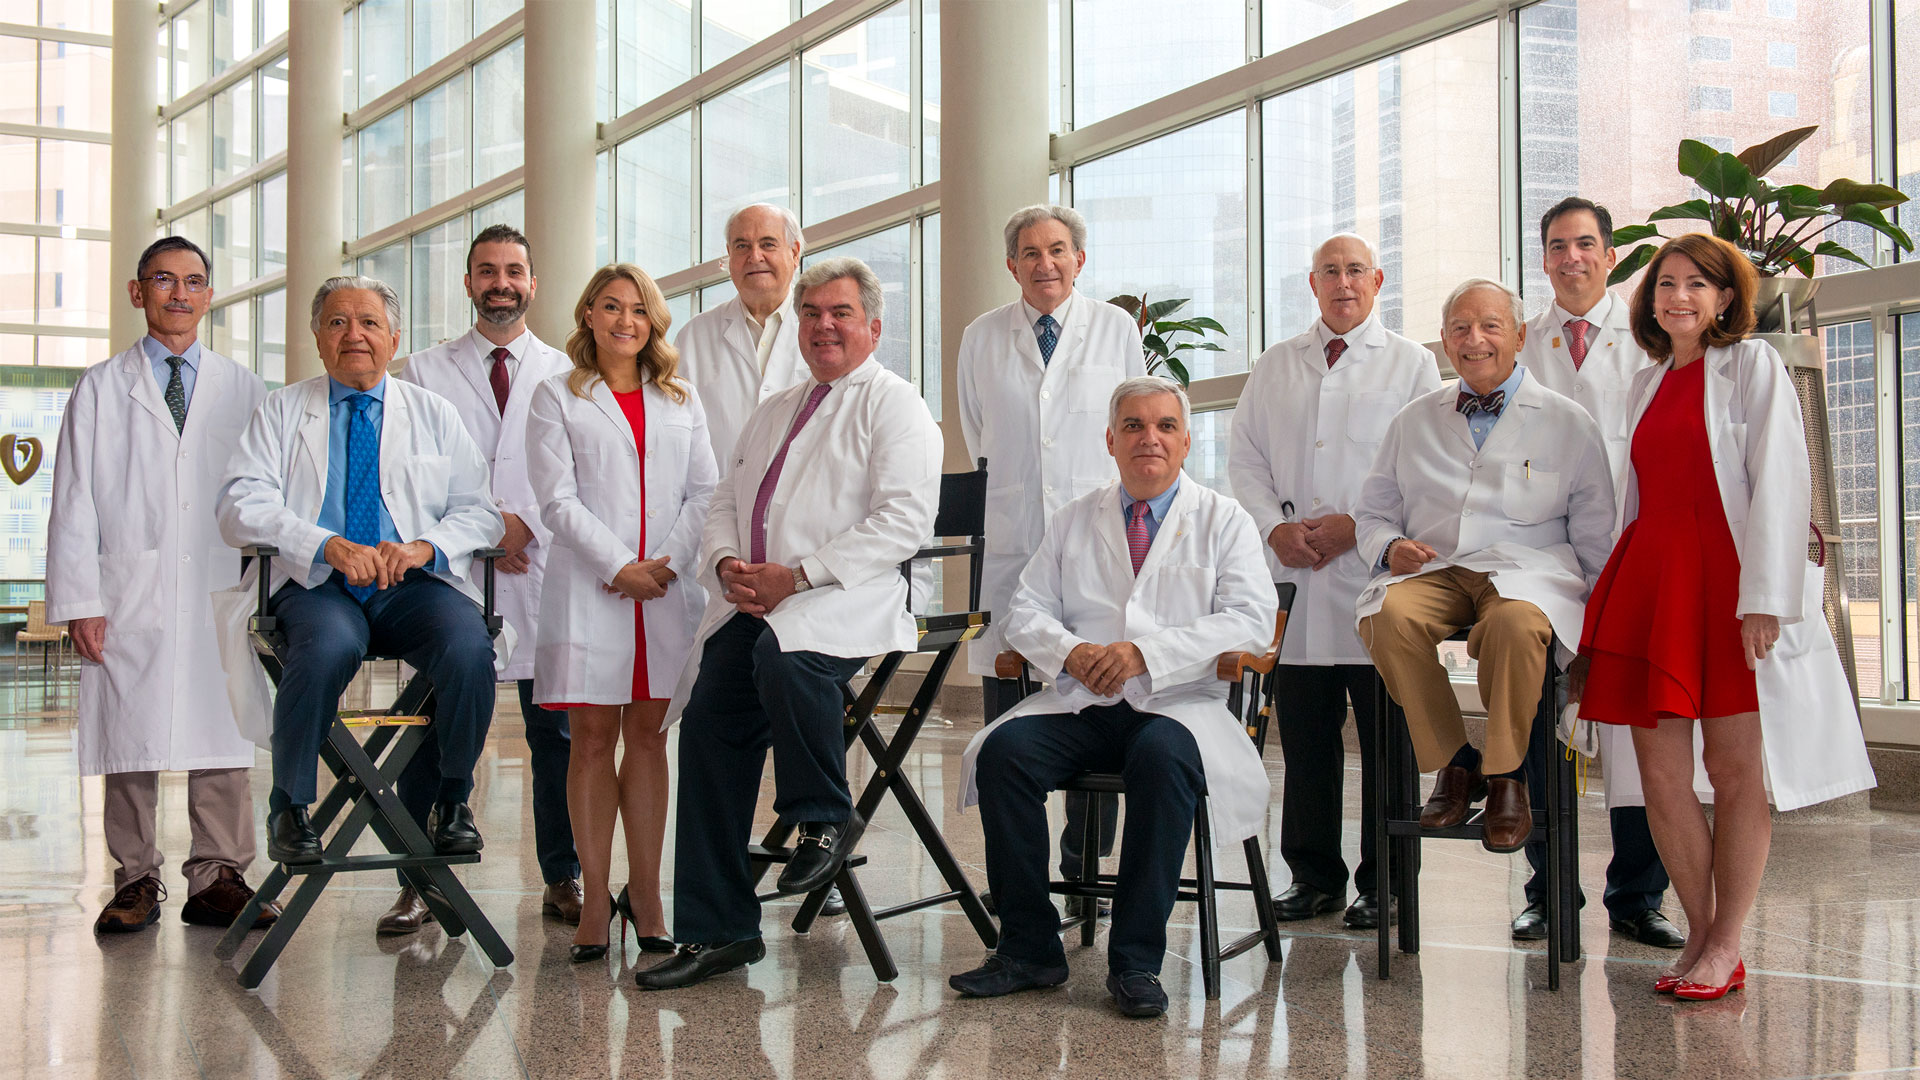 Doctors of the Texas Heart Medical Group photograph